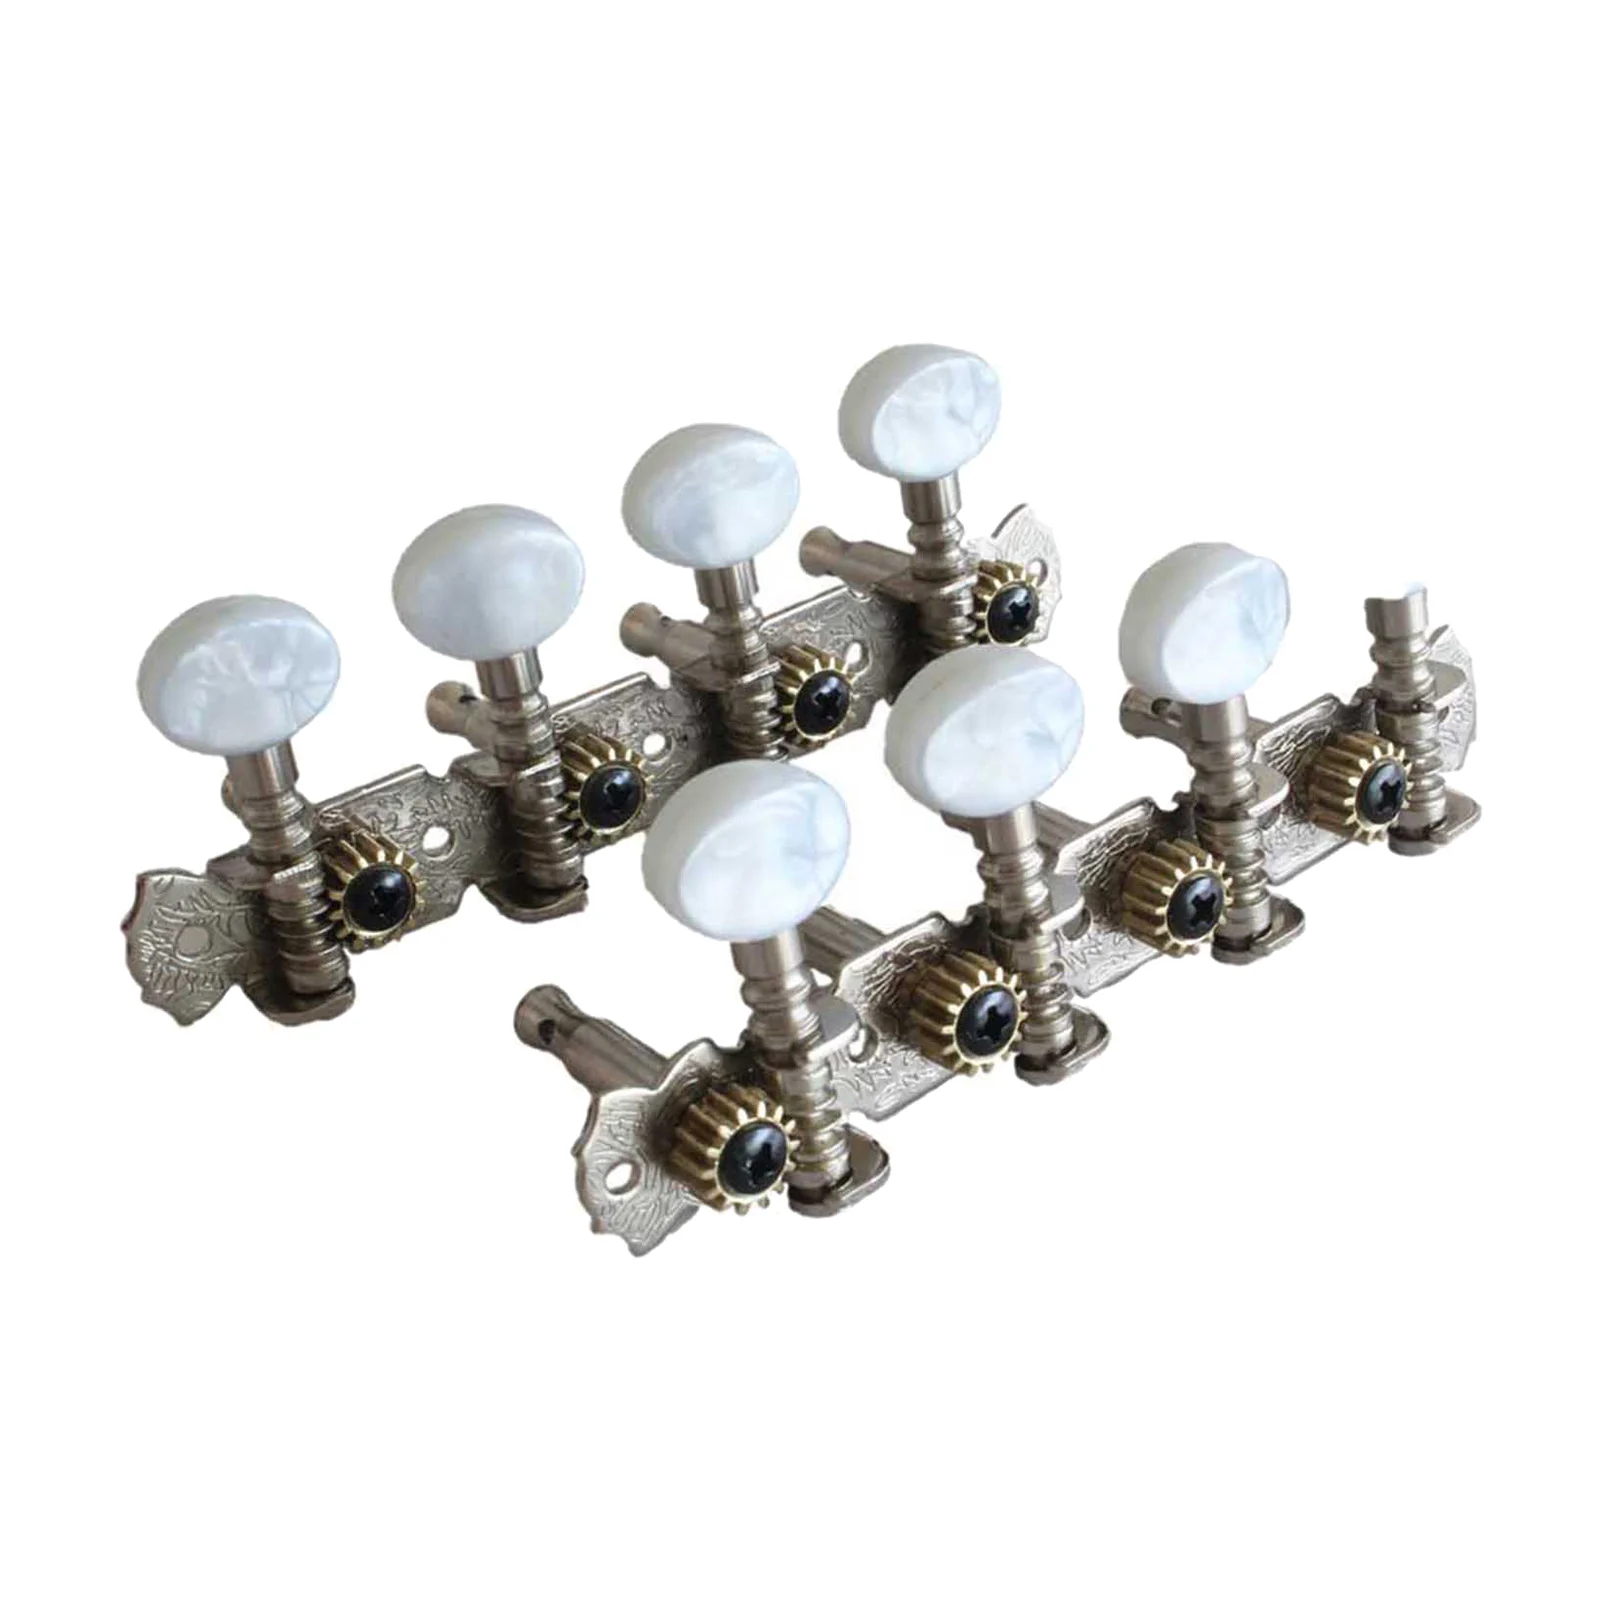 A Set of 4R4L Chrome Mandolin Tuning Pegs Tuners Machine Heads String Tuners Mandolin Accessories